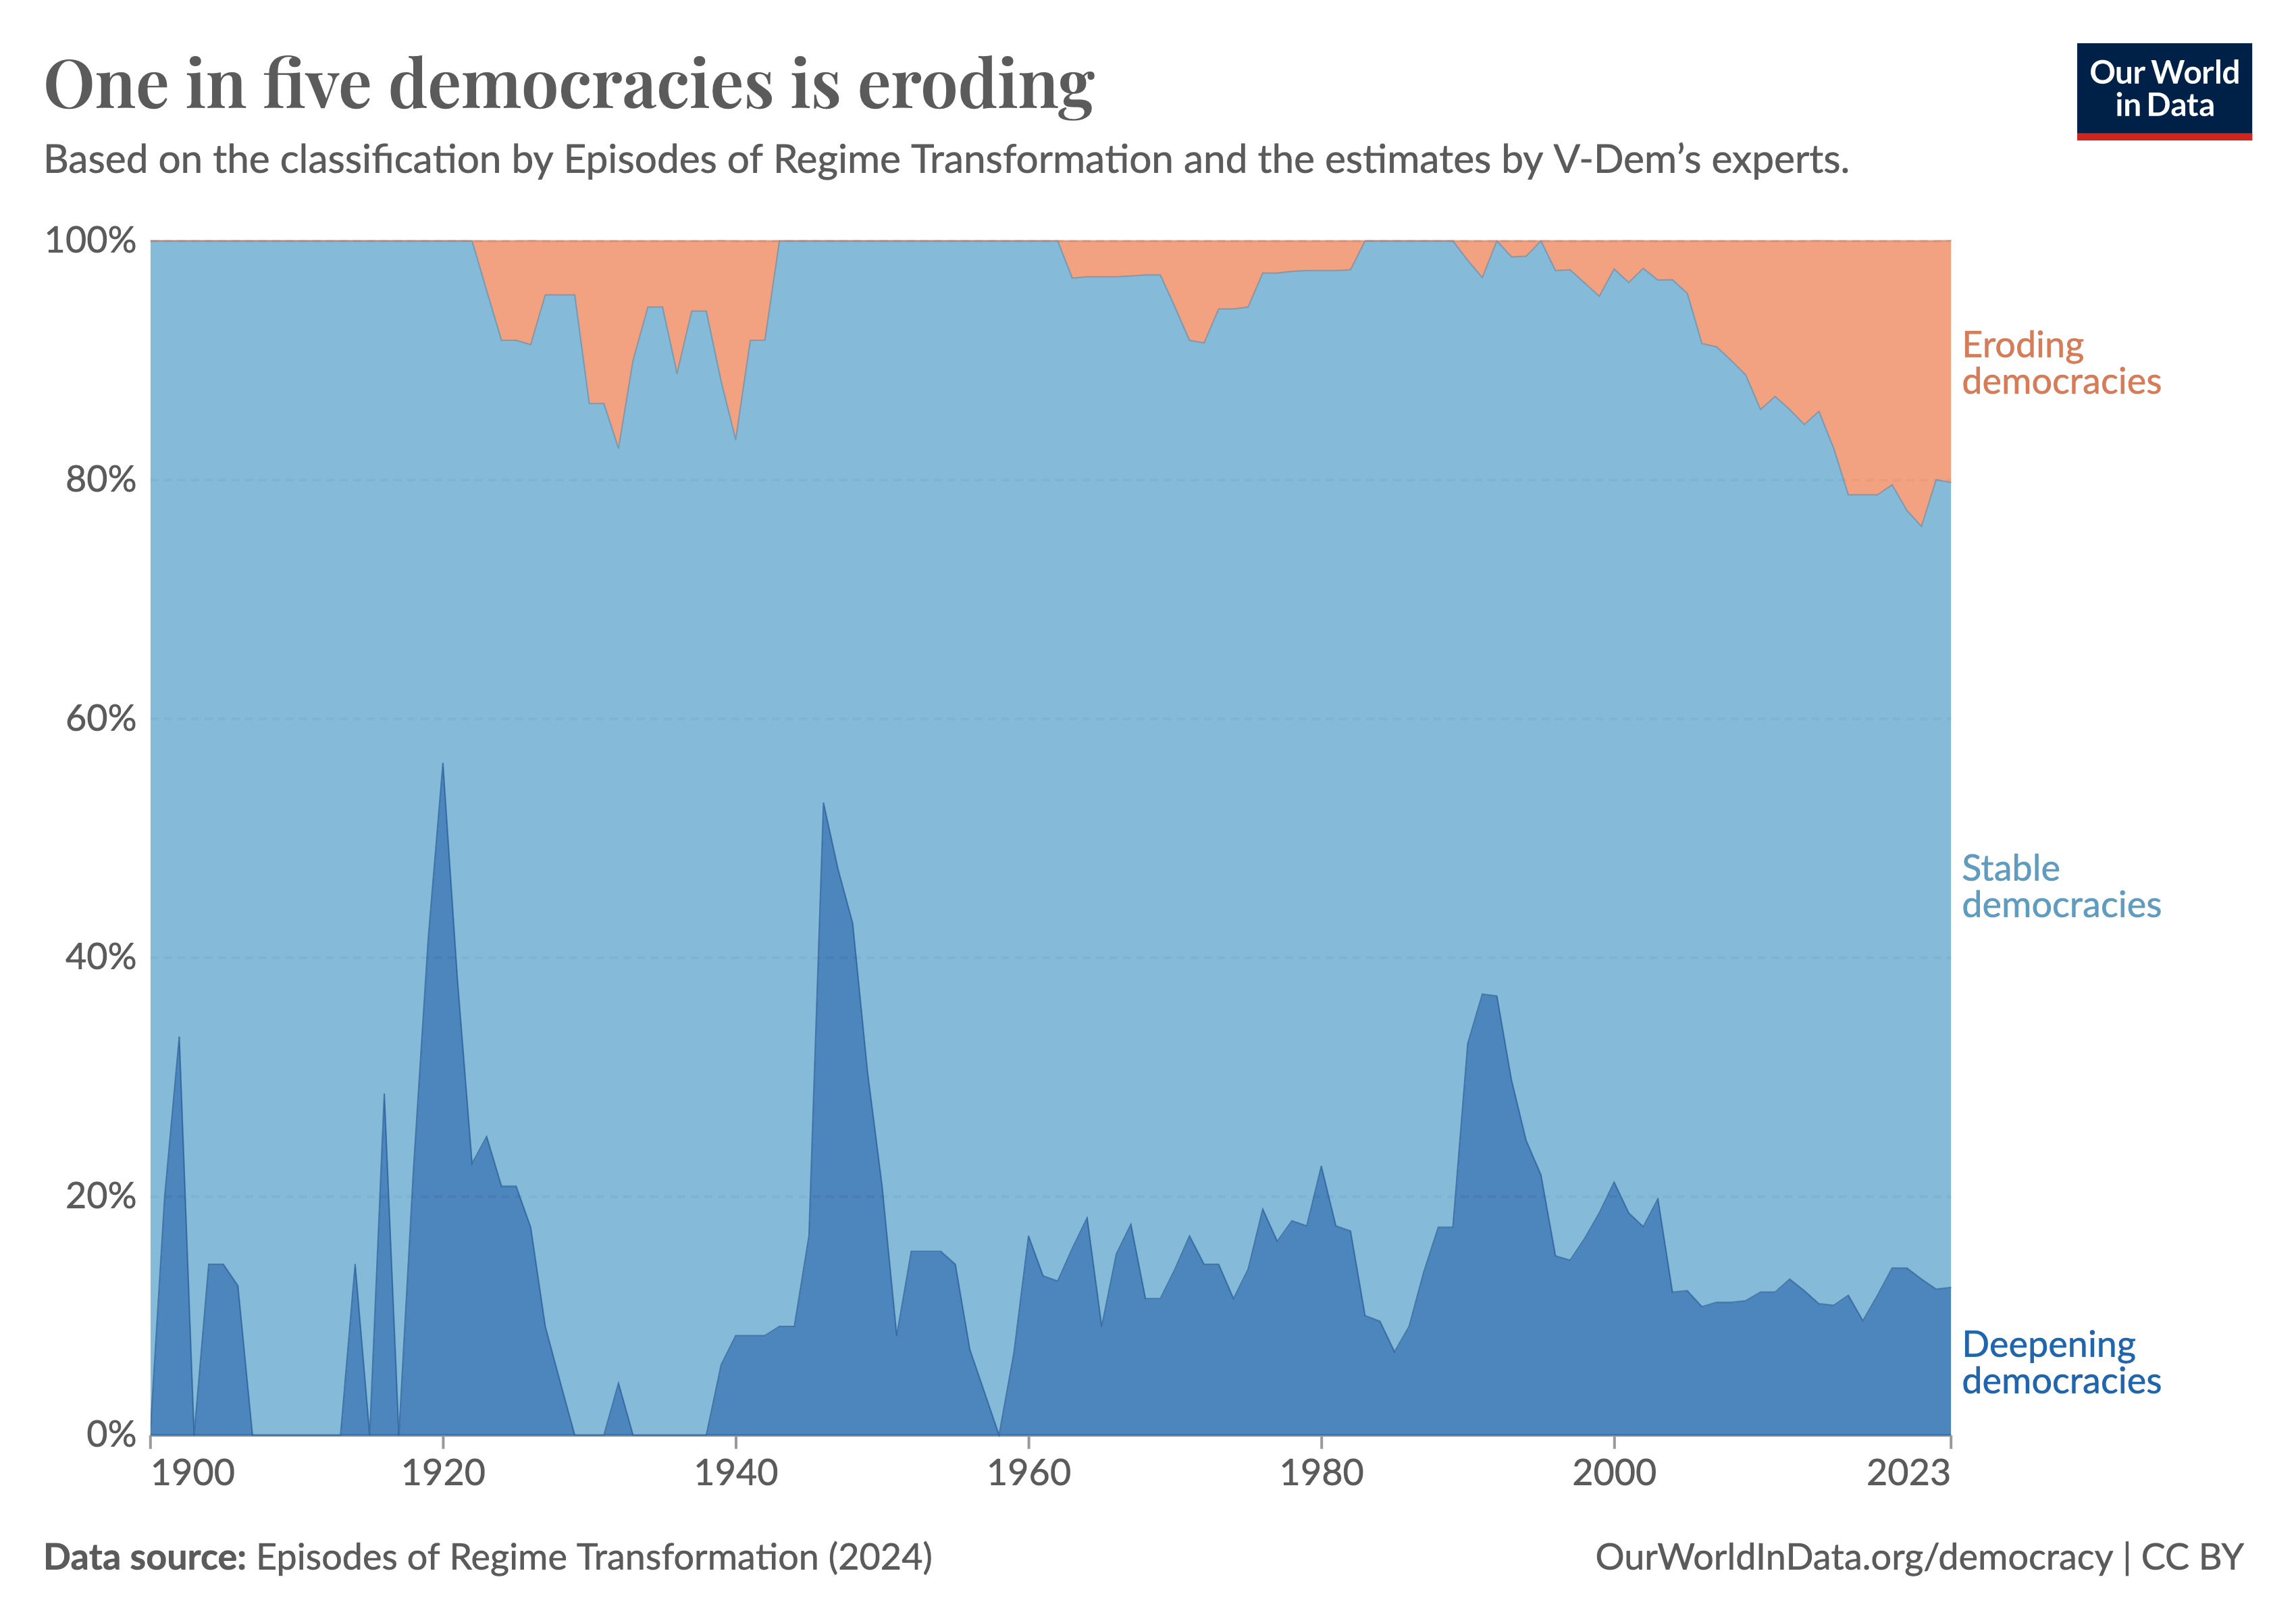 Stacked area chart showing the share of eroding democracies, stable democracies, and deepening democracies since 1900. Eroding democracies are at their highest level ever, at around 20% of all democracies.